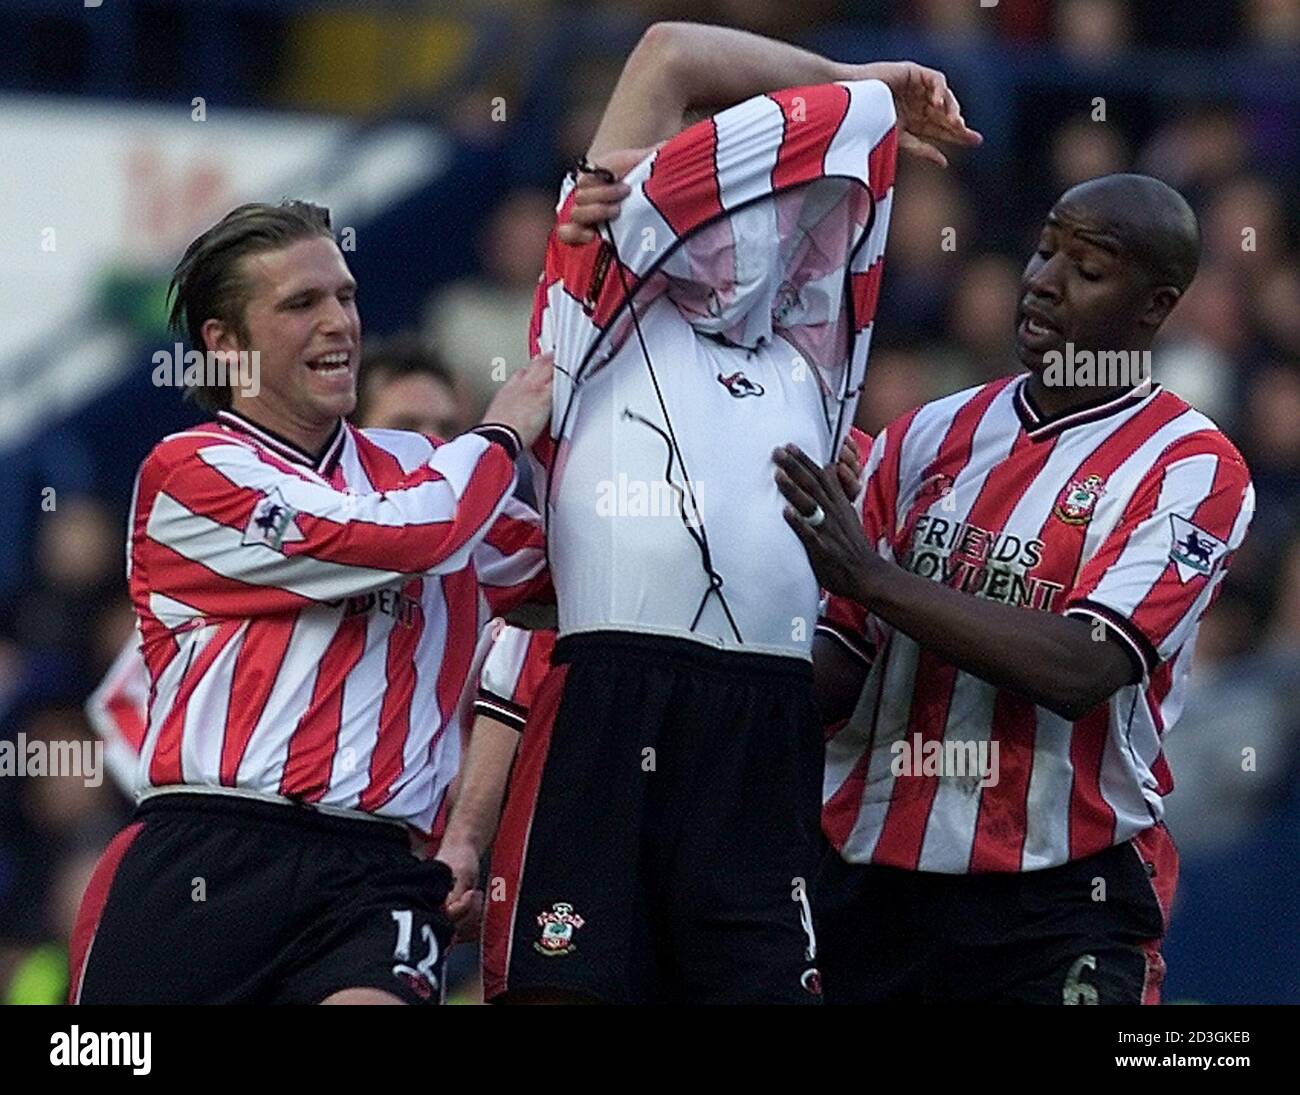 Southampton's James Beattie (C) tears his shirt off as he celebrates his goal with team mates Anders Svensson (L) and Paul Williams during their english premier league match against Chelsea at Stamford Bridge January 1, 2002. NO INTERNET/ONLINE USAGE WITHOUT FAPL LICENCE. FOR DETAILS SEE FAPLWEB.COM. REUTERS/Ian Waldie  IW/PS Stock Photo